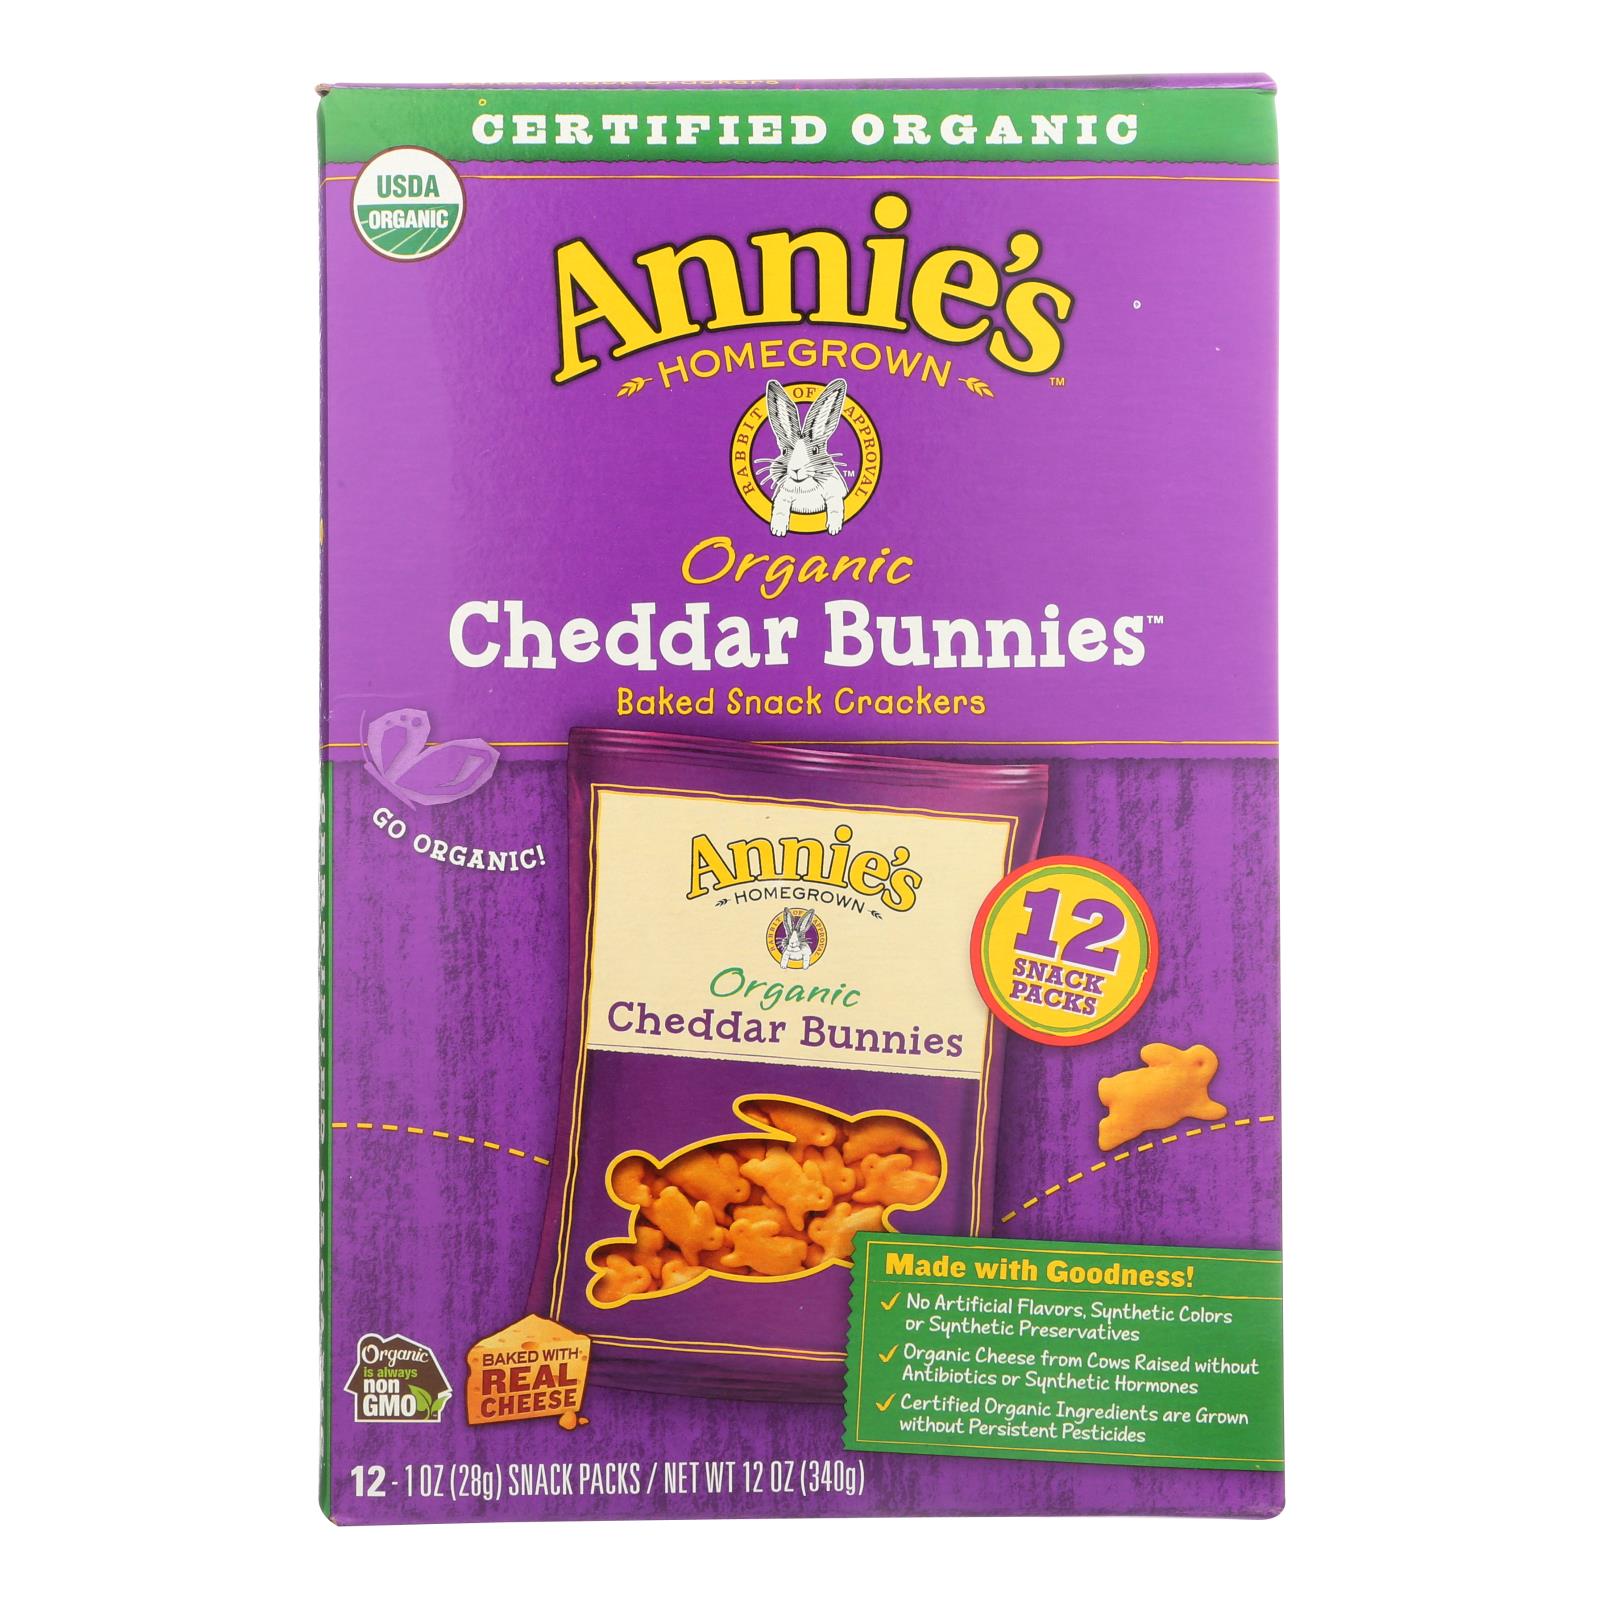 Annie'S Homegrown, Annie's Homegrown Organic Bunny Cracker Snack Pack - Cheddar - Case of 4 - 12/1 oz (Pack of 4)